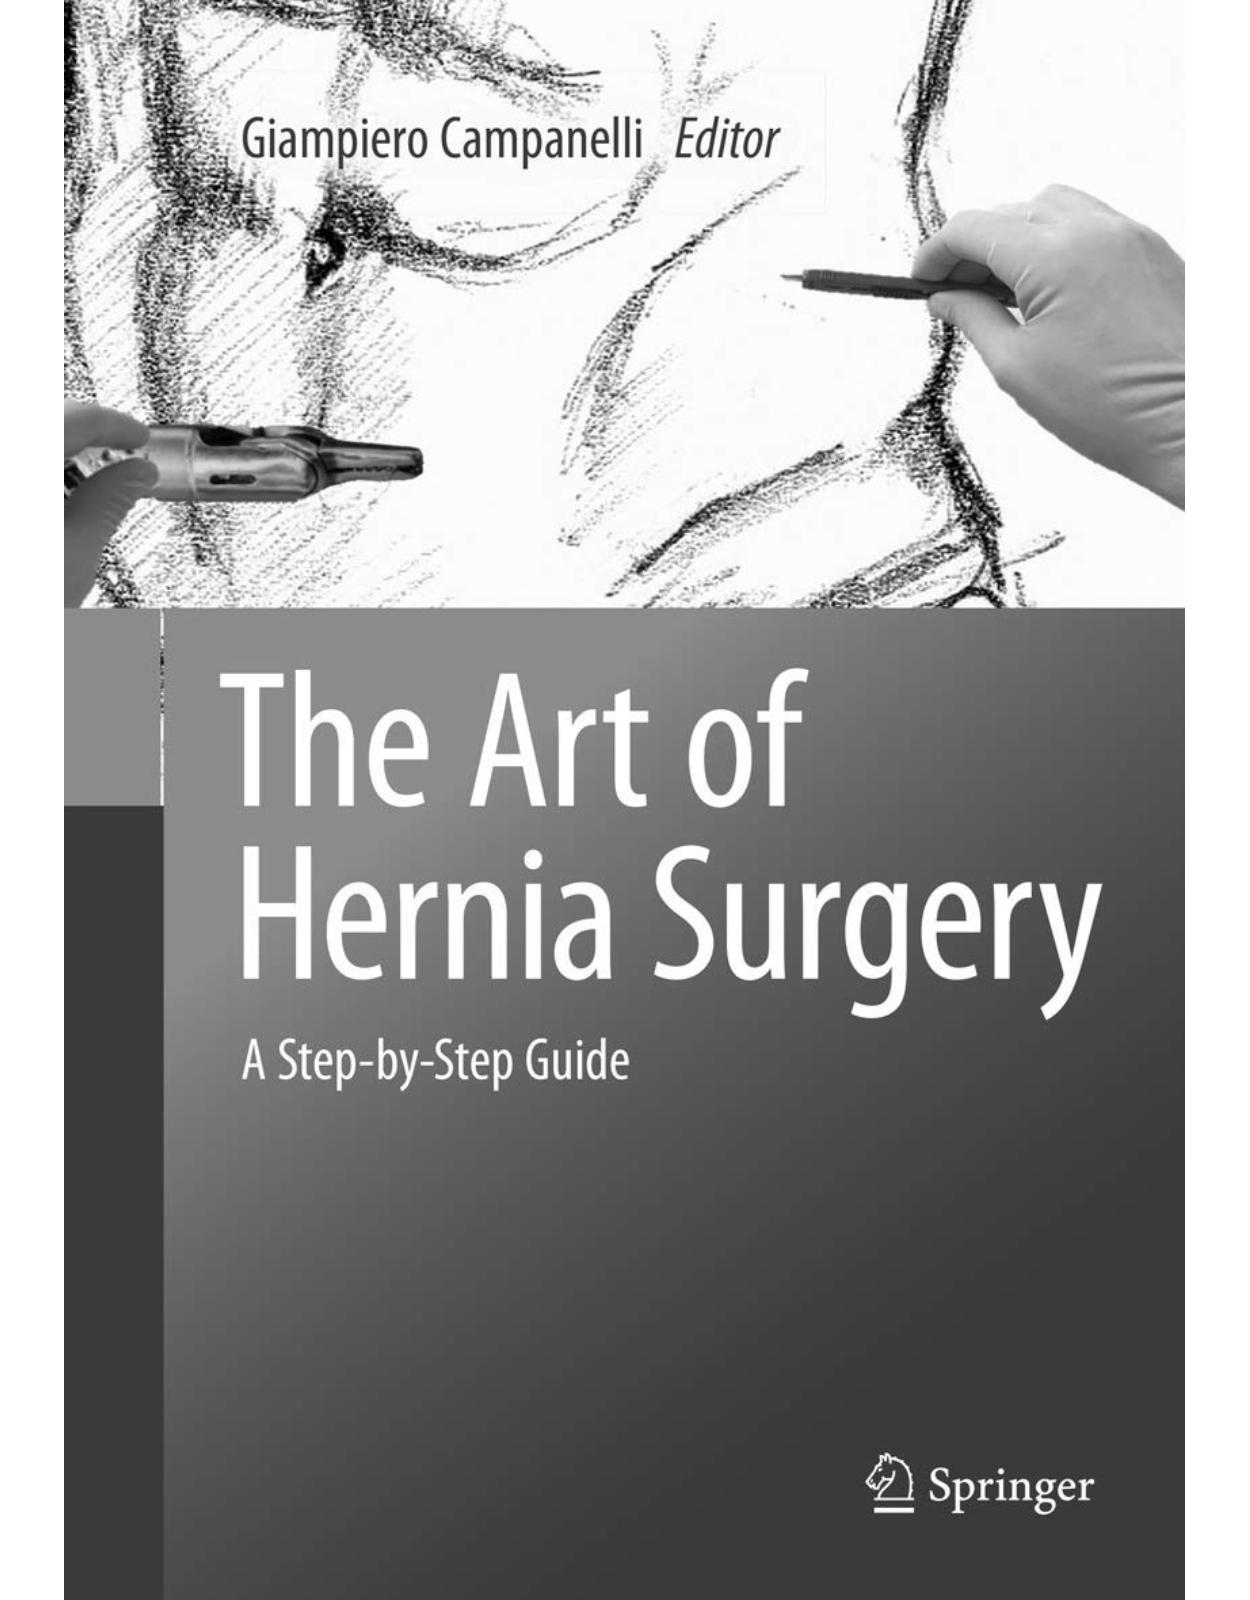 The Art of Hernia Surgery: A Step-by-Step Guide